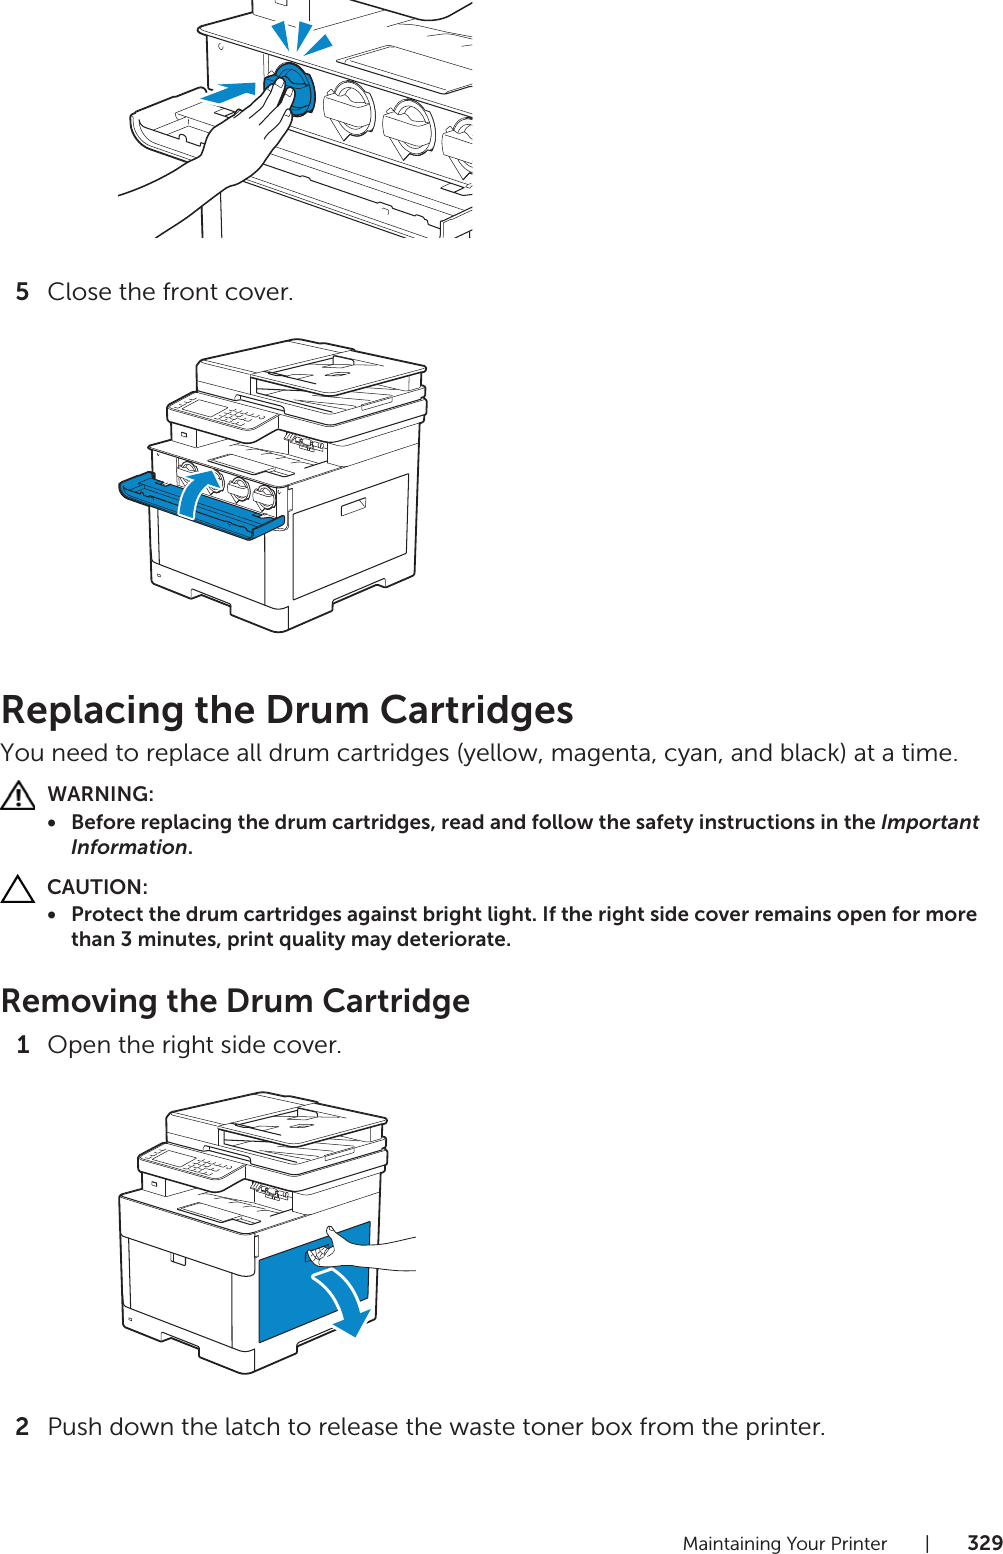 Maintaining Your Printer |3295Close the front cover.Replacing the Drum CartridgesYou need to replace all drum cartridges (yellow, magenta, cyan, and black) at a time.WARNING:• Before replacing the drum cartridges, read and follow the safety instructions in the Important Information.CAUTION:• Protect the drum cartridges against bright light. If the right side cover remains open for more than 3 minutes, print quality may deteriorate.Removing the Drum Cartridge1Open the right side cover.2Push down the latch to release the waste toner box from the printer.